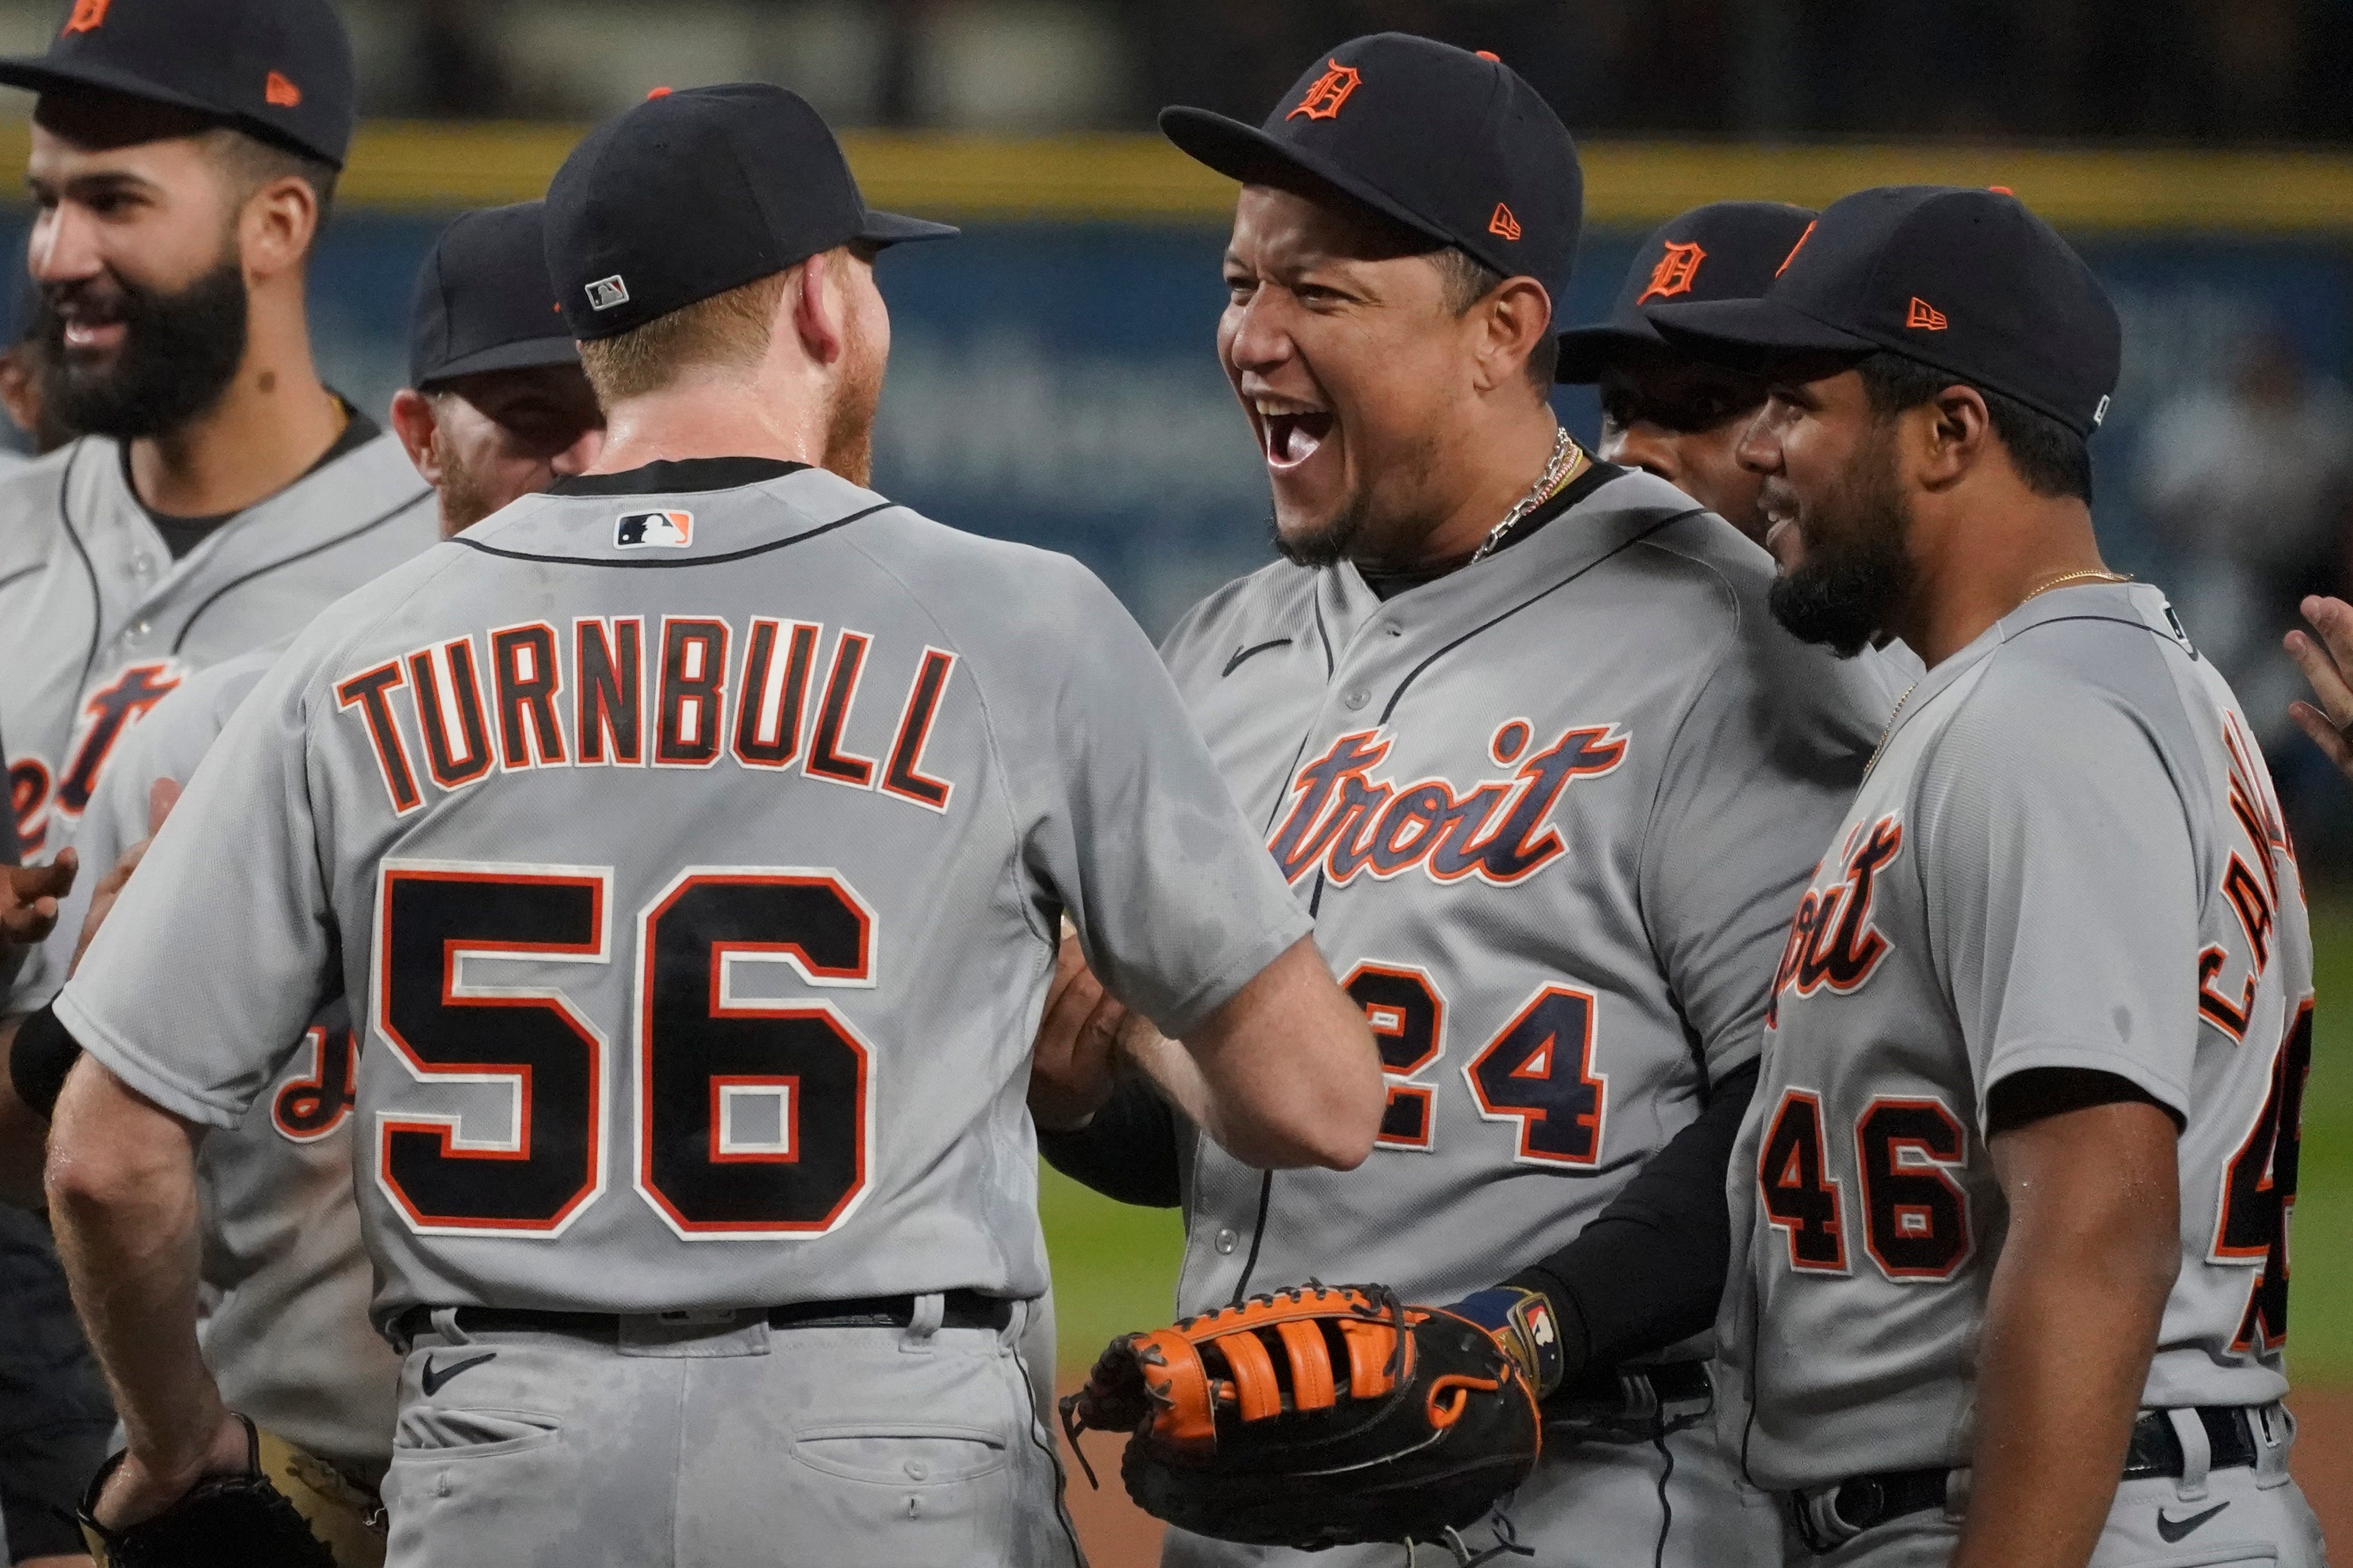 Detroit Tigers starting pitcher Spencer Turnbull (56) is greeted by first baseman Miguel Cabrera (24) and third baseman Jeimer Candelario (46) after Turnbull threw a no-hitter against the Seattle Mariners on Tuesday, May 18.